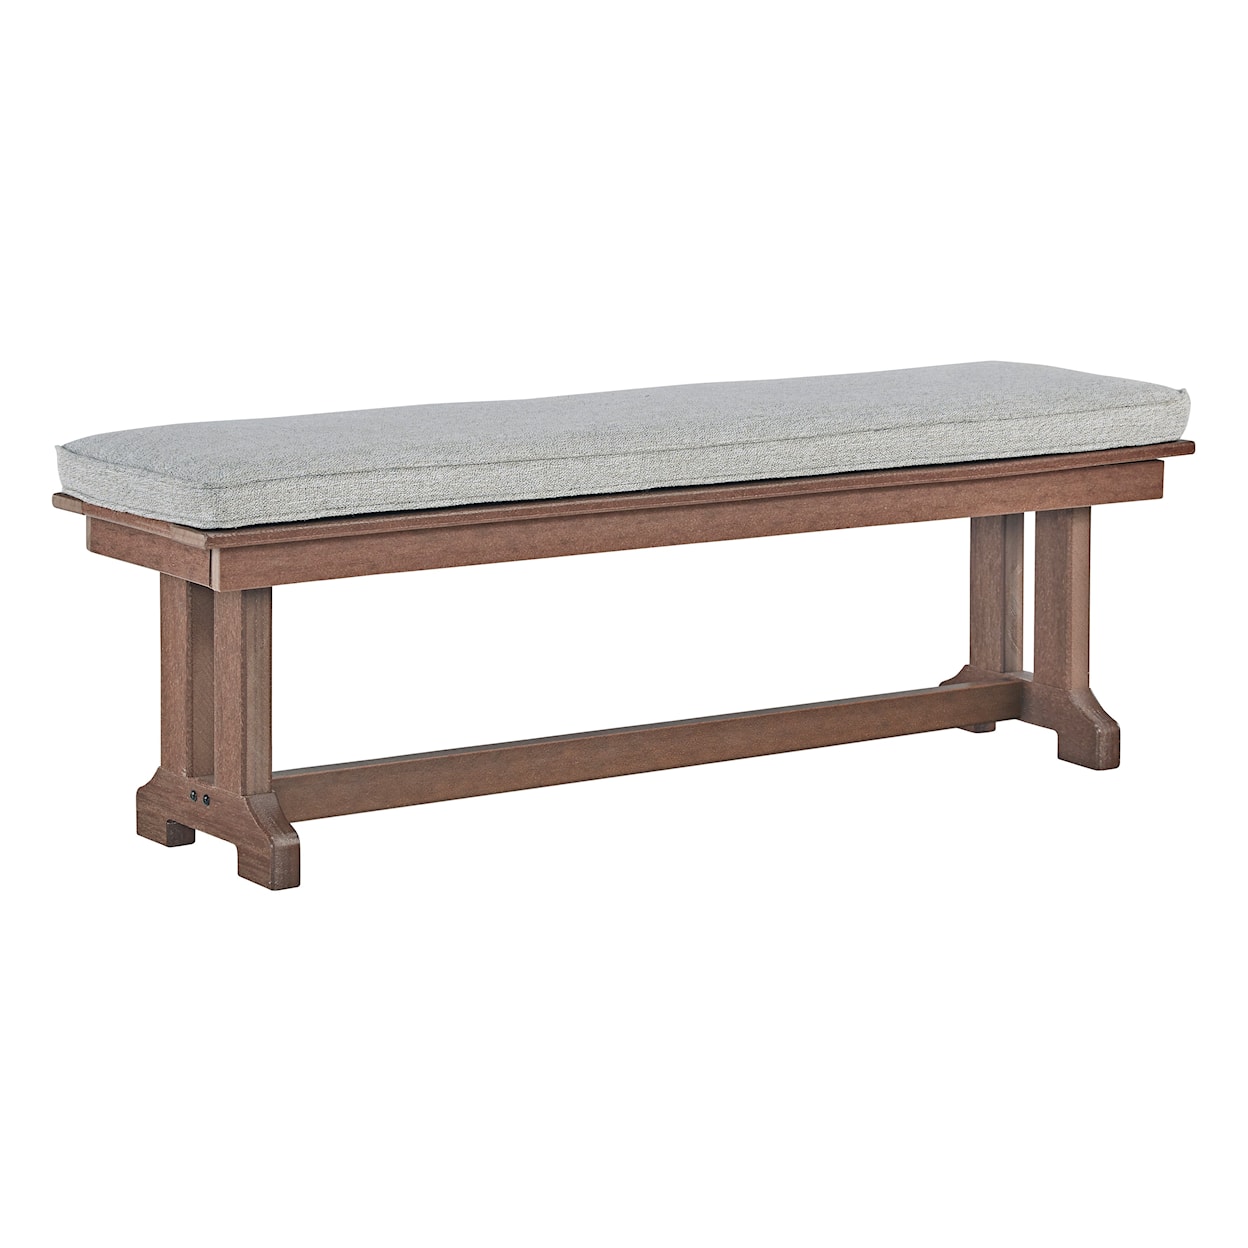 Signature Design Emmeline Outdoor Dining Bench with Cushion